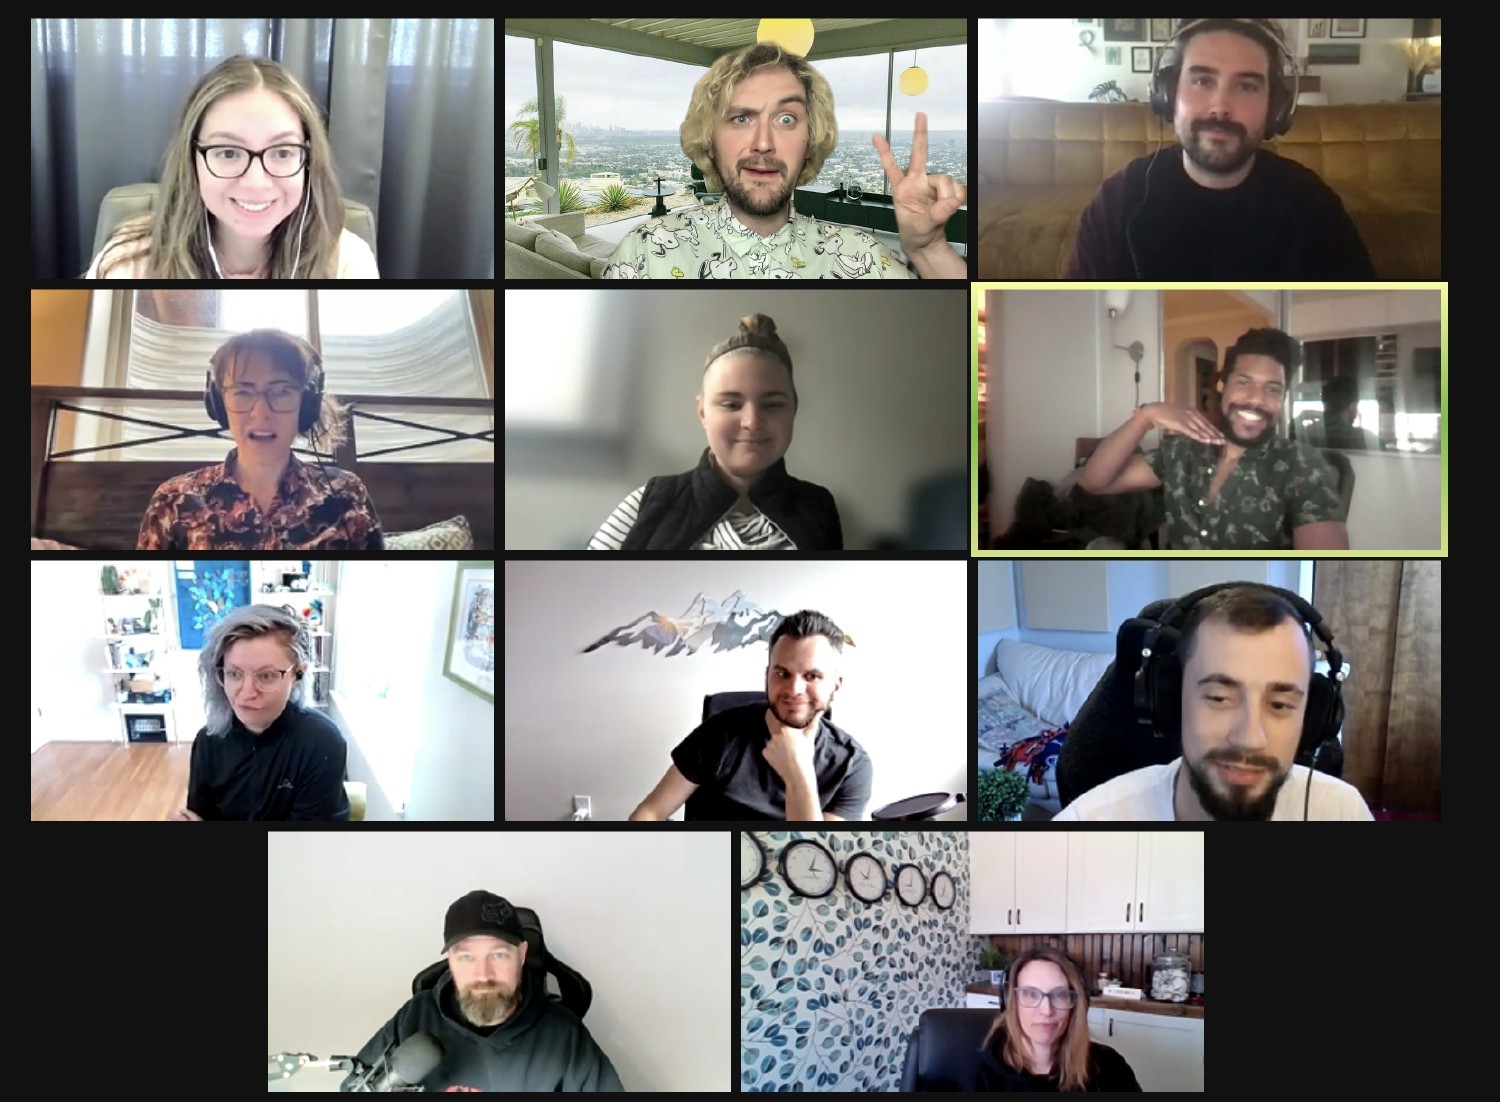 Another shenanigan-filled virtual happy hour with the RevenueZen team!